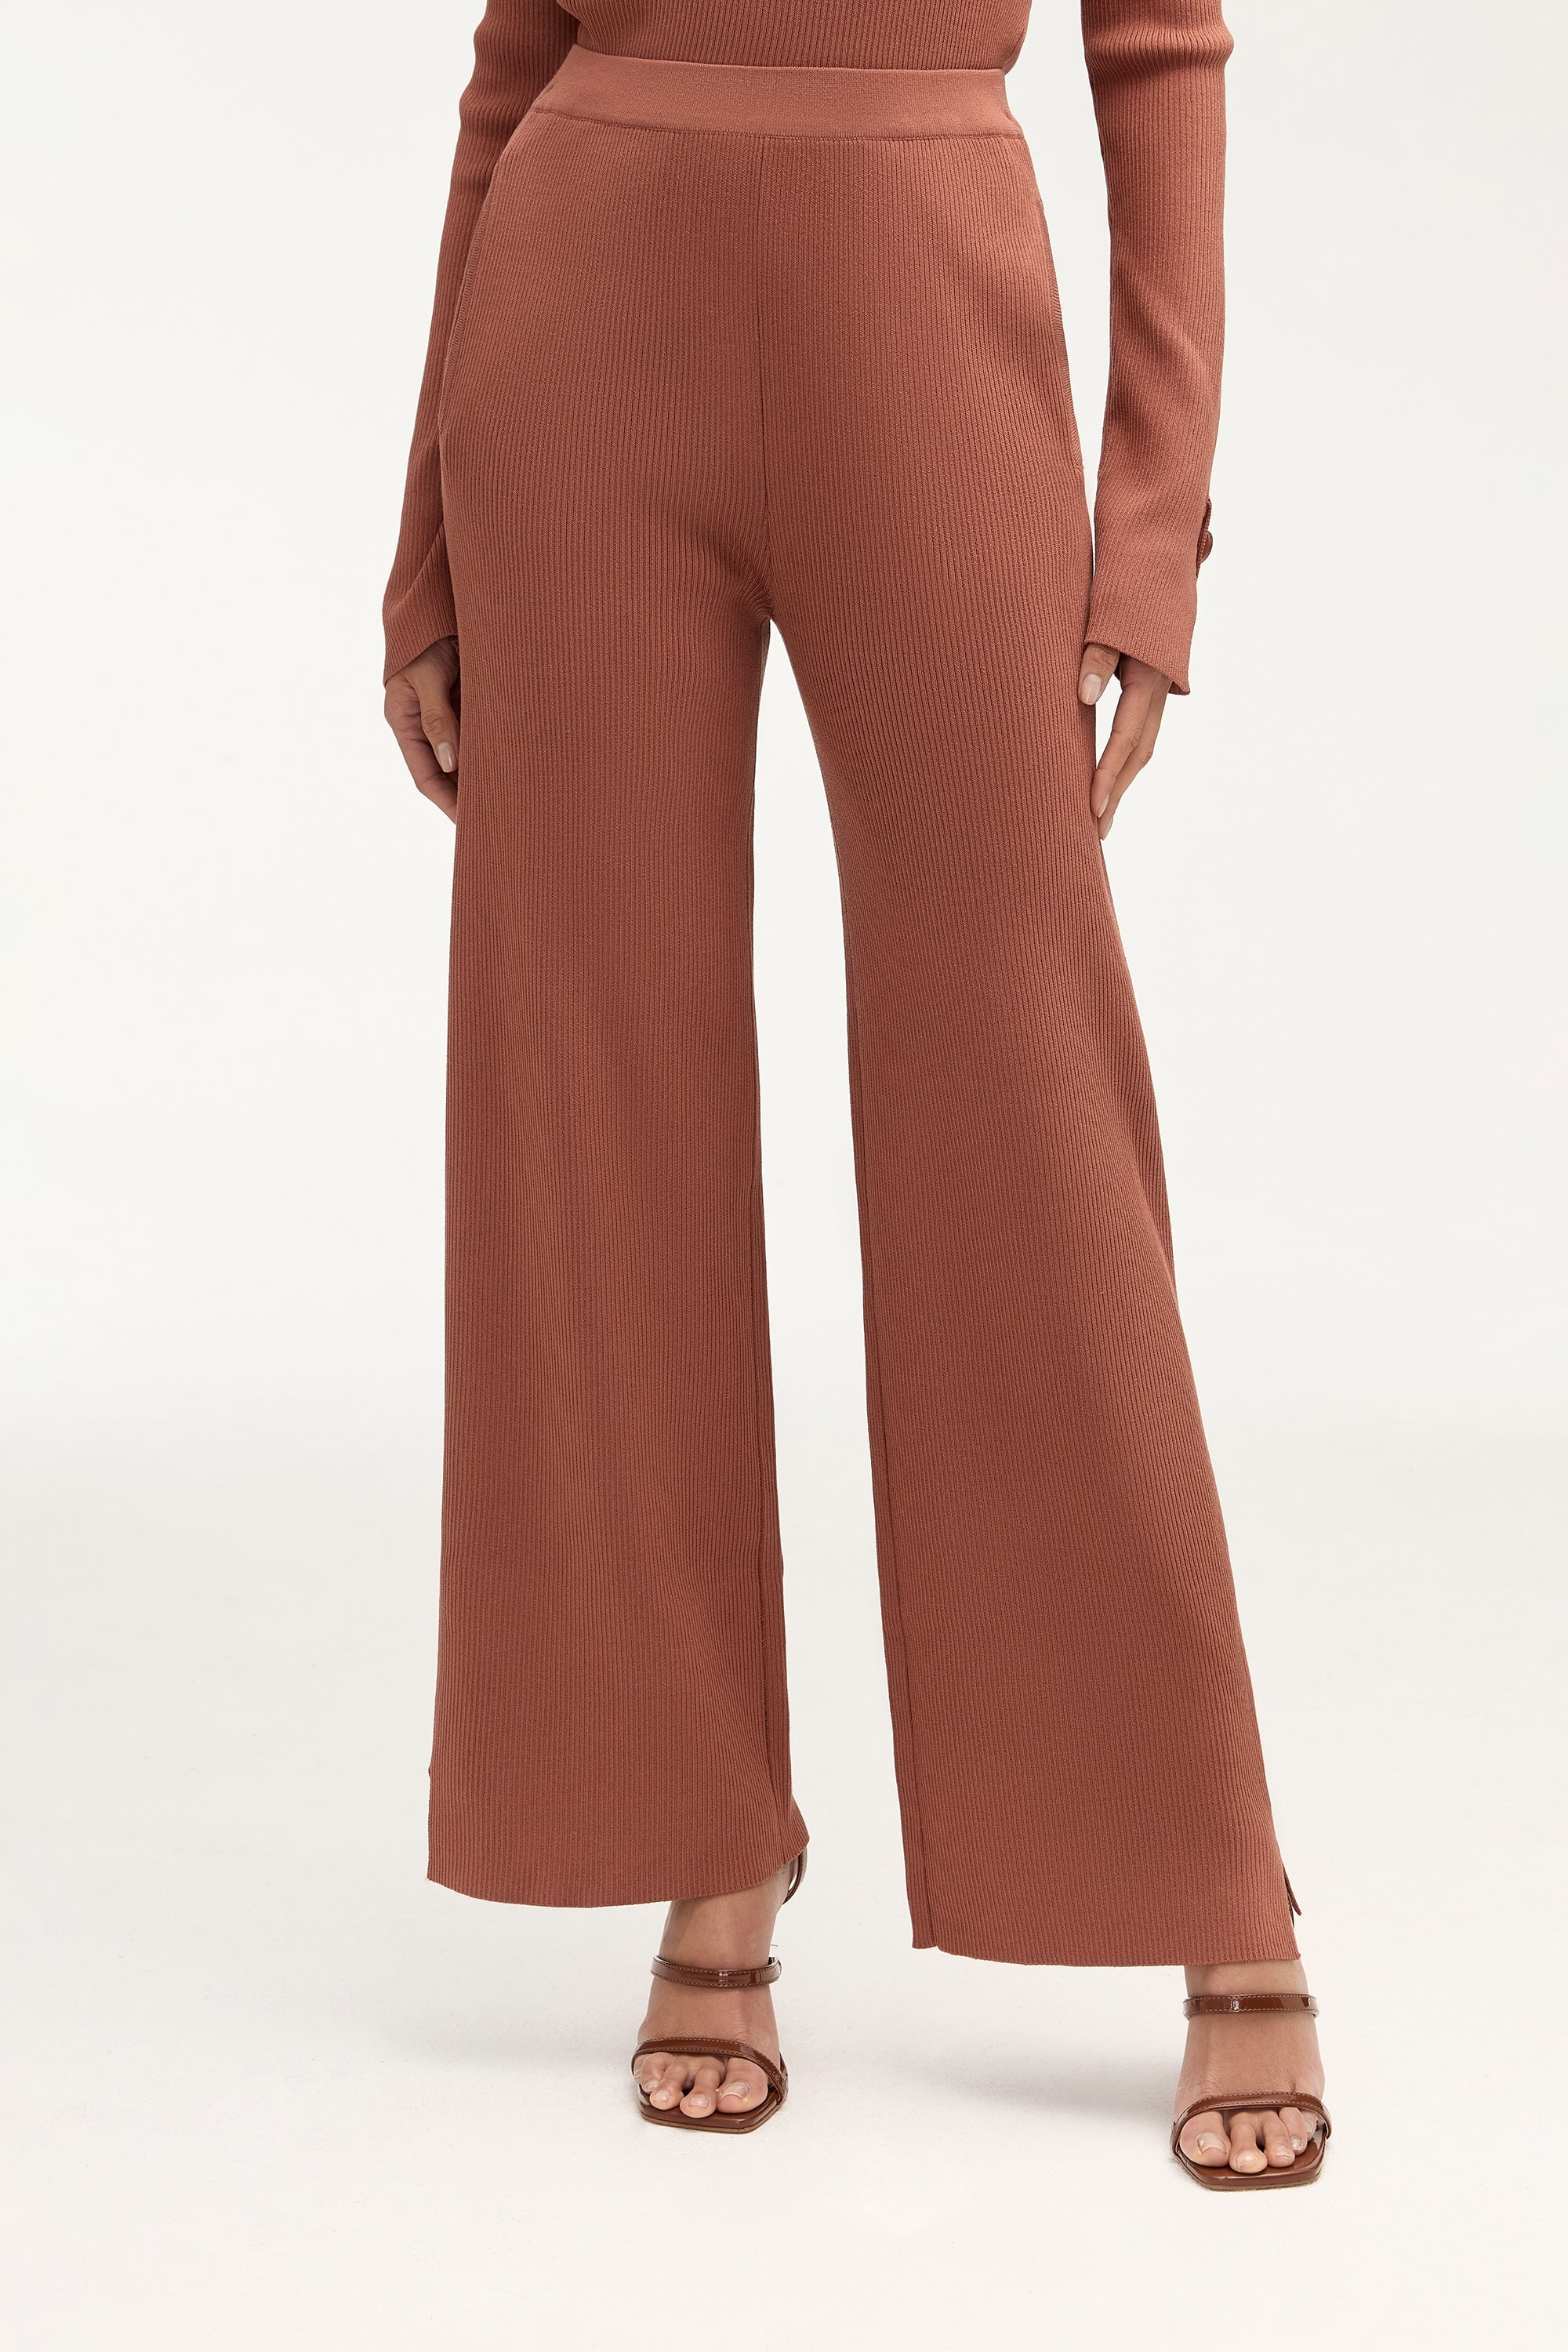 Remy Ribbed Knit Wide Leg Pants Clothing epschoolboard 